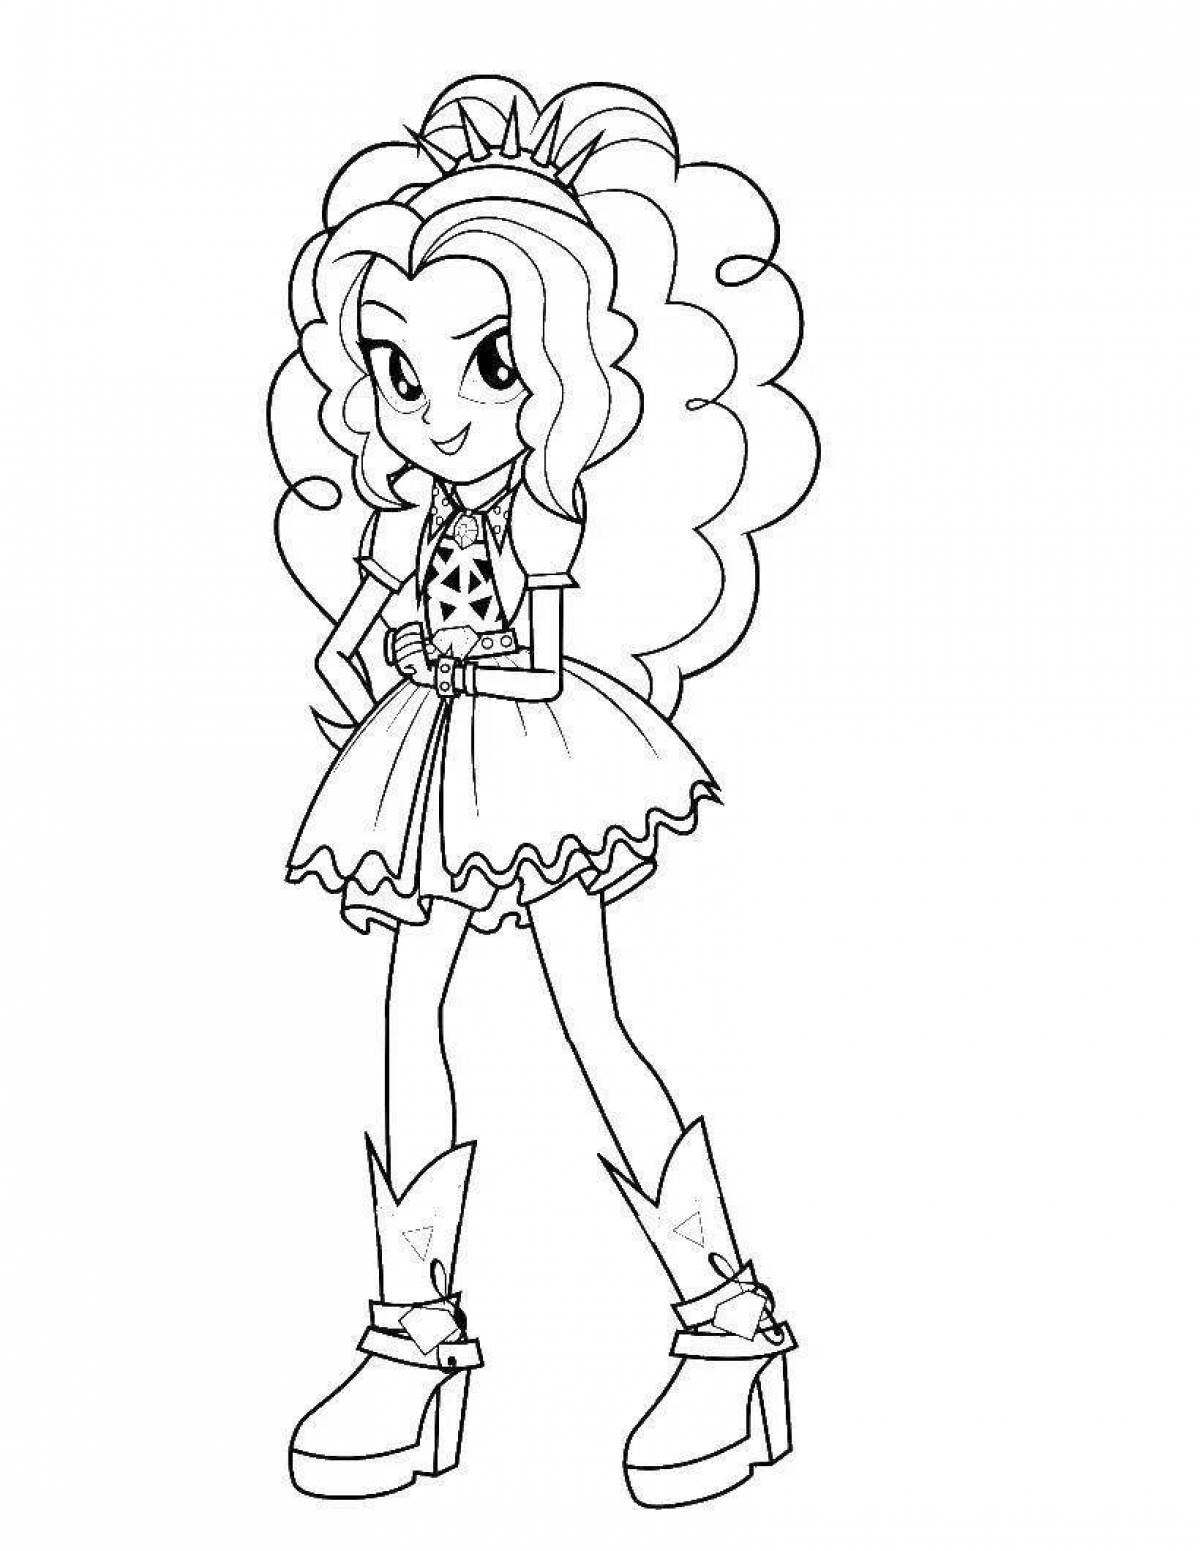 Cute little pony girls coloring pages